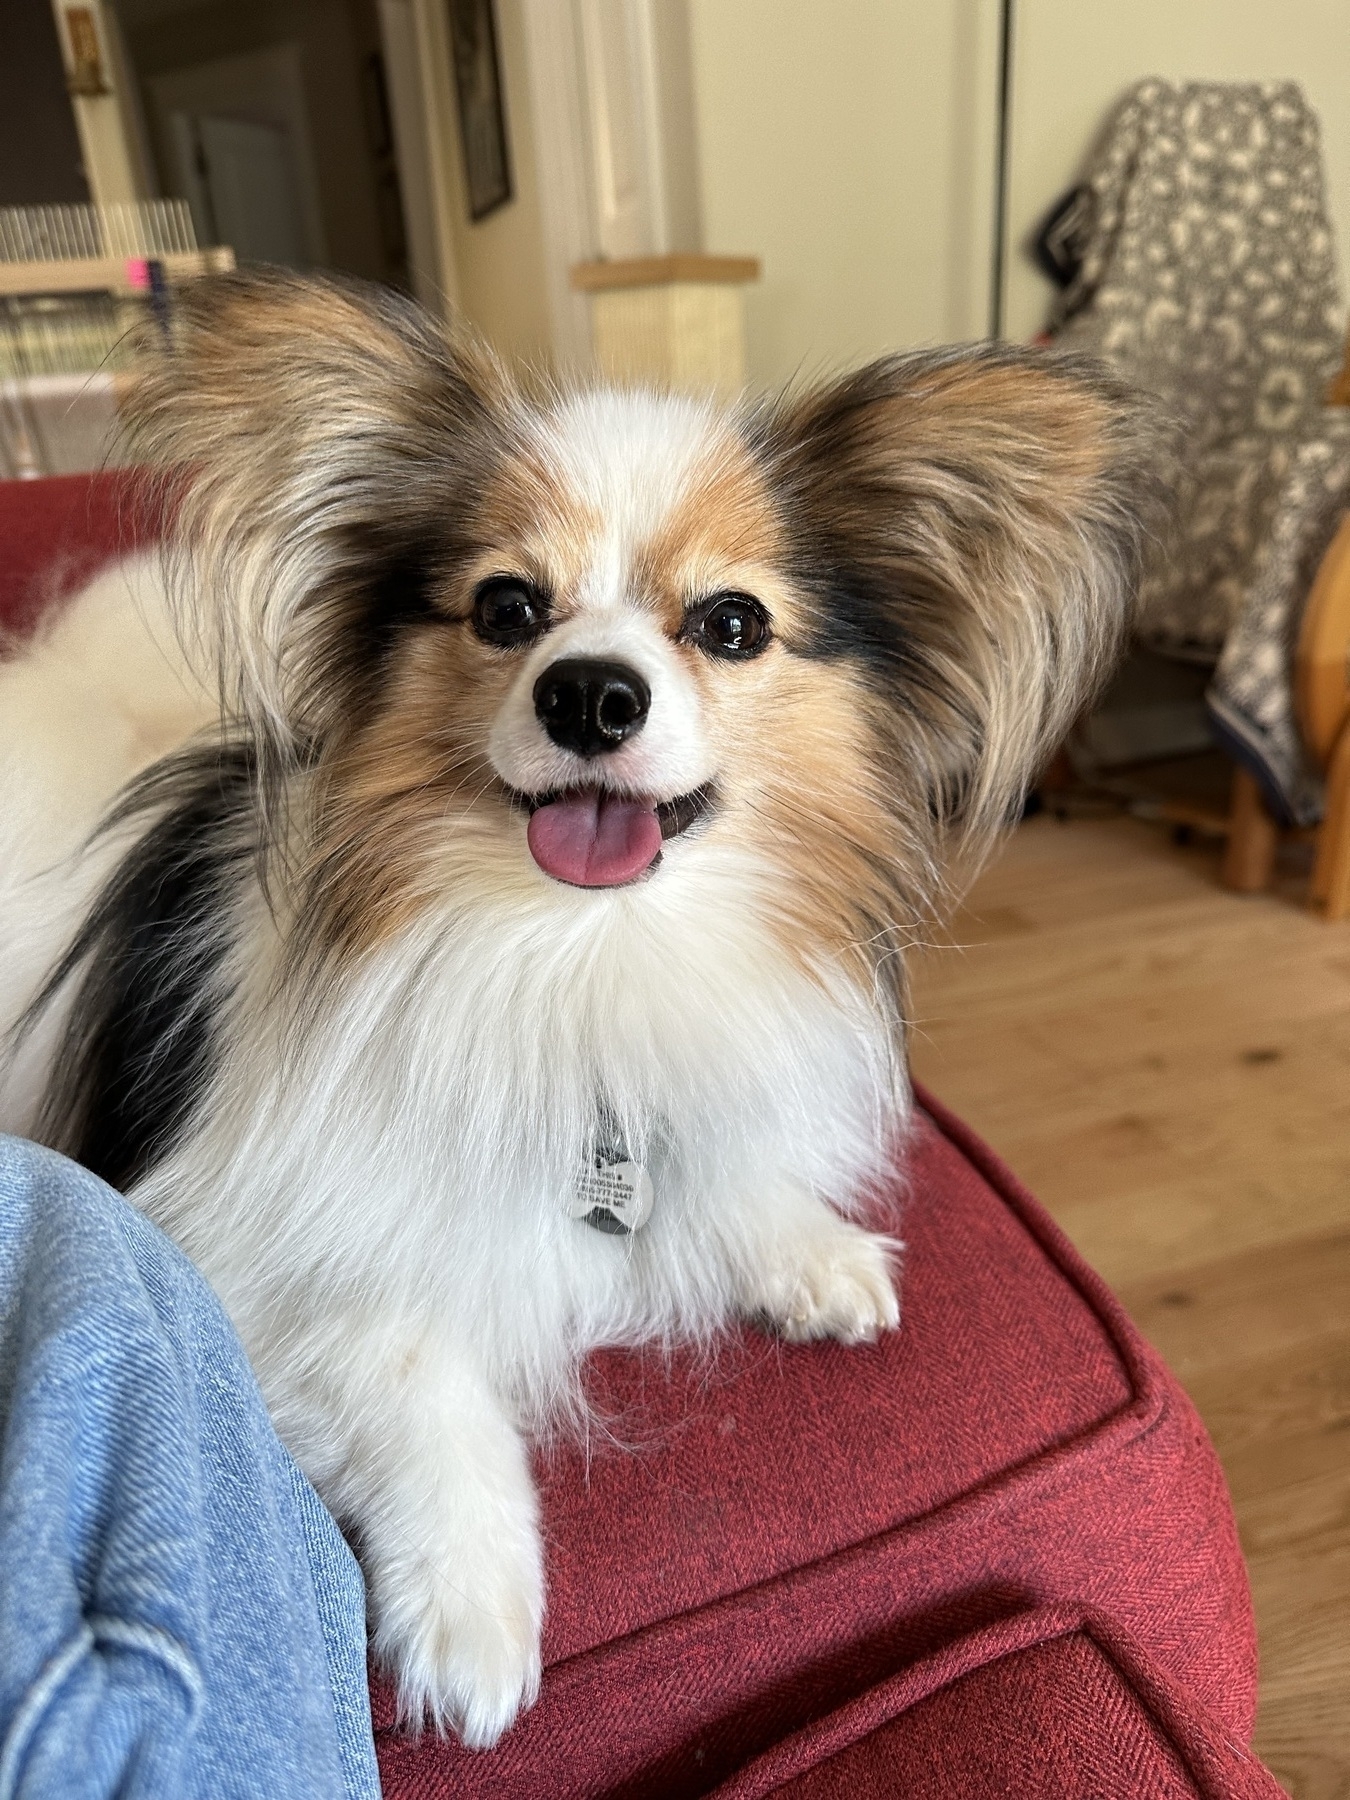 White, black, and tan papillon dog sitting on a red couch and smiling at the camera.